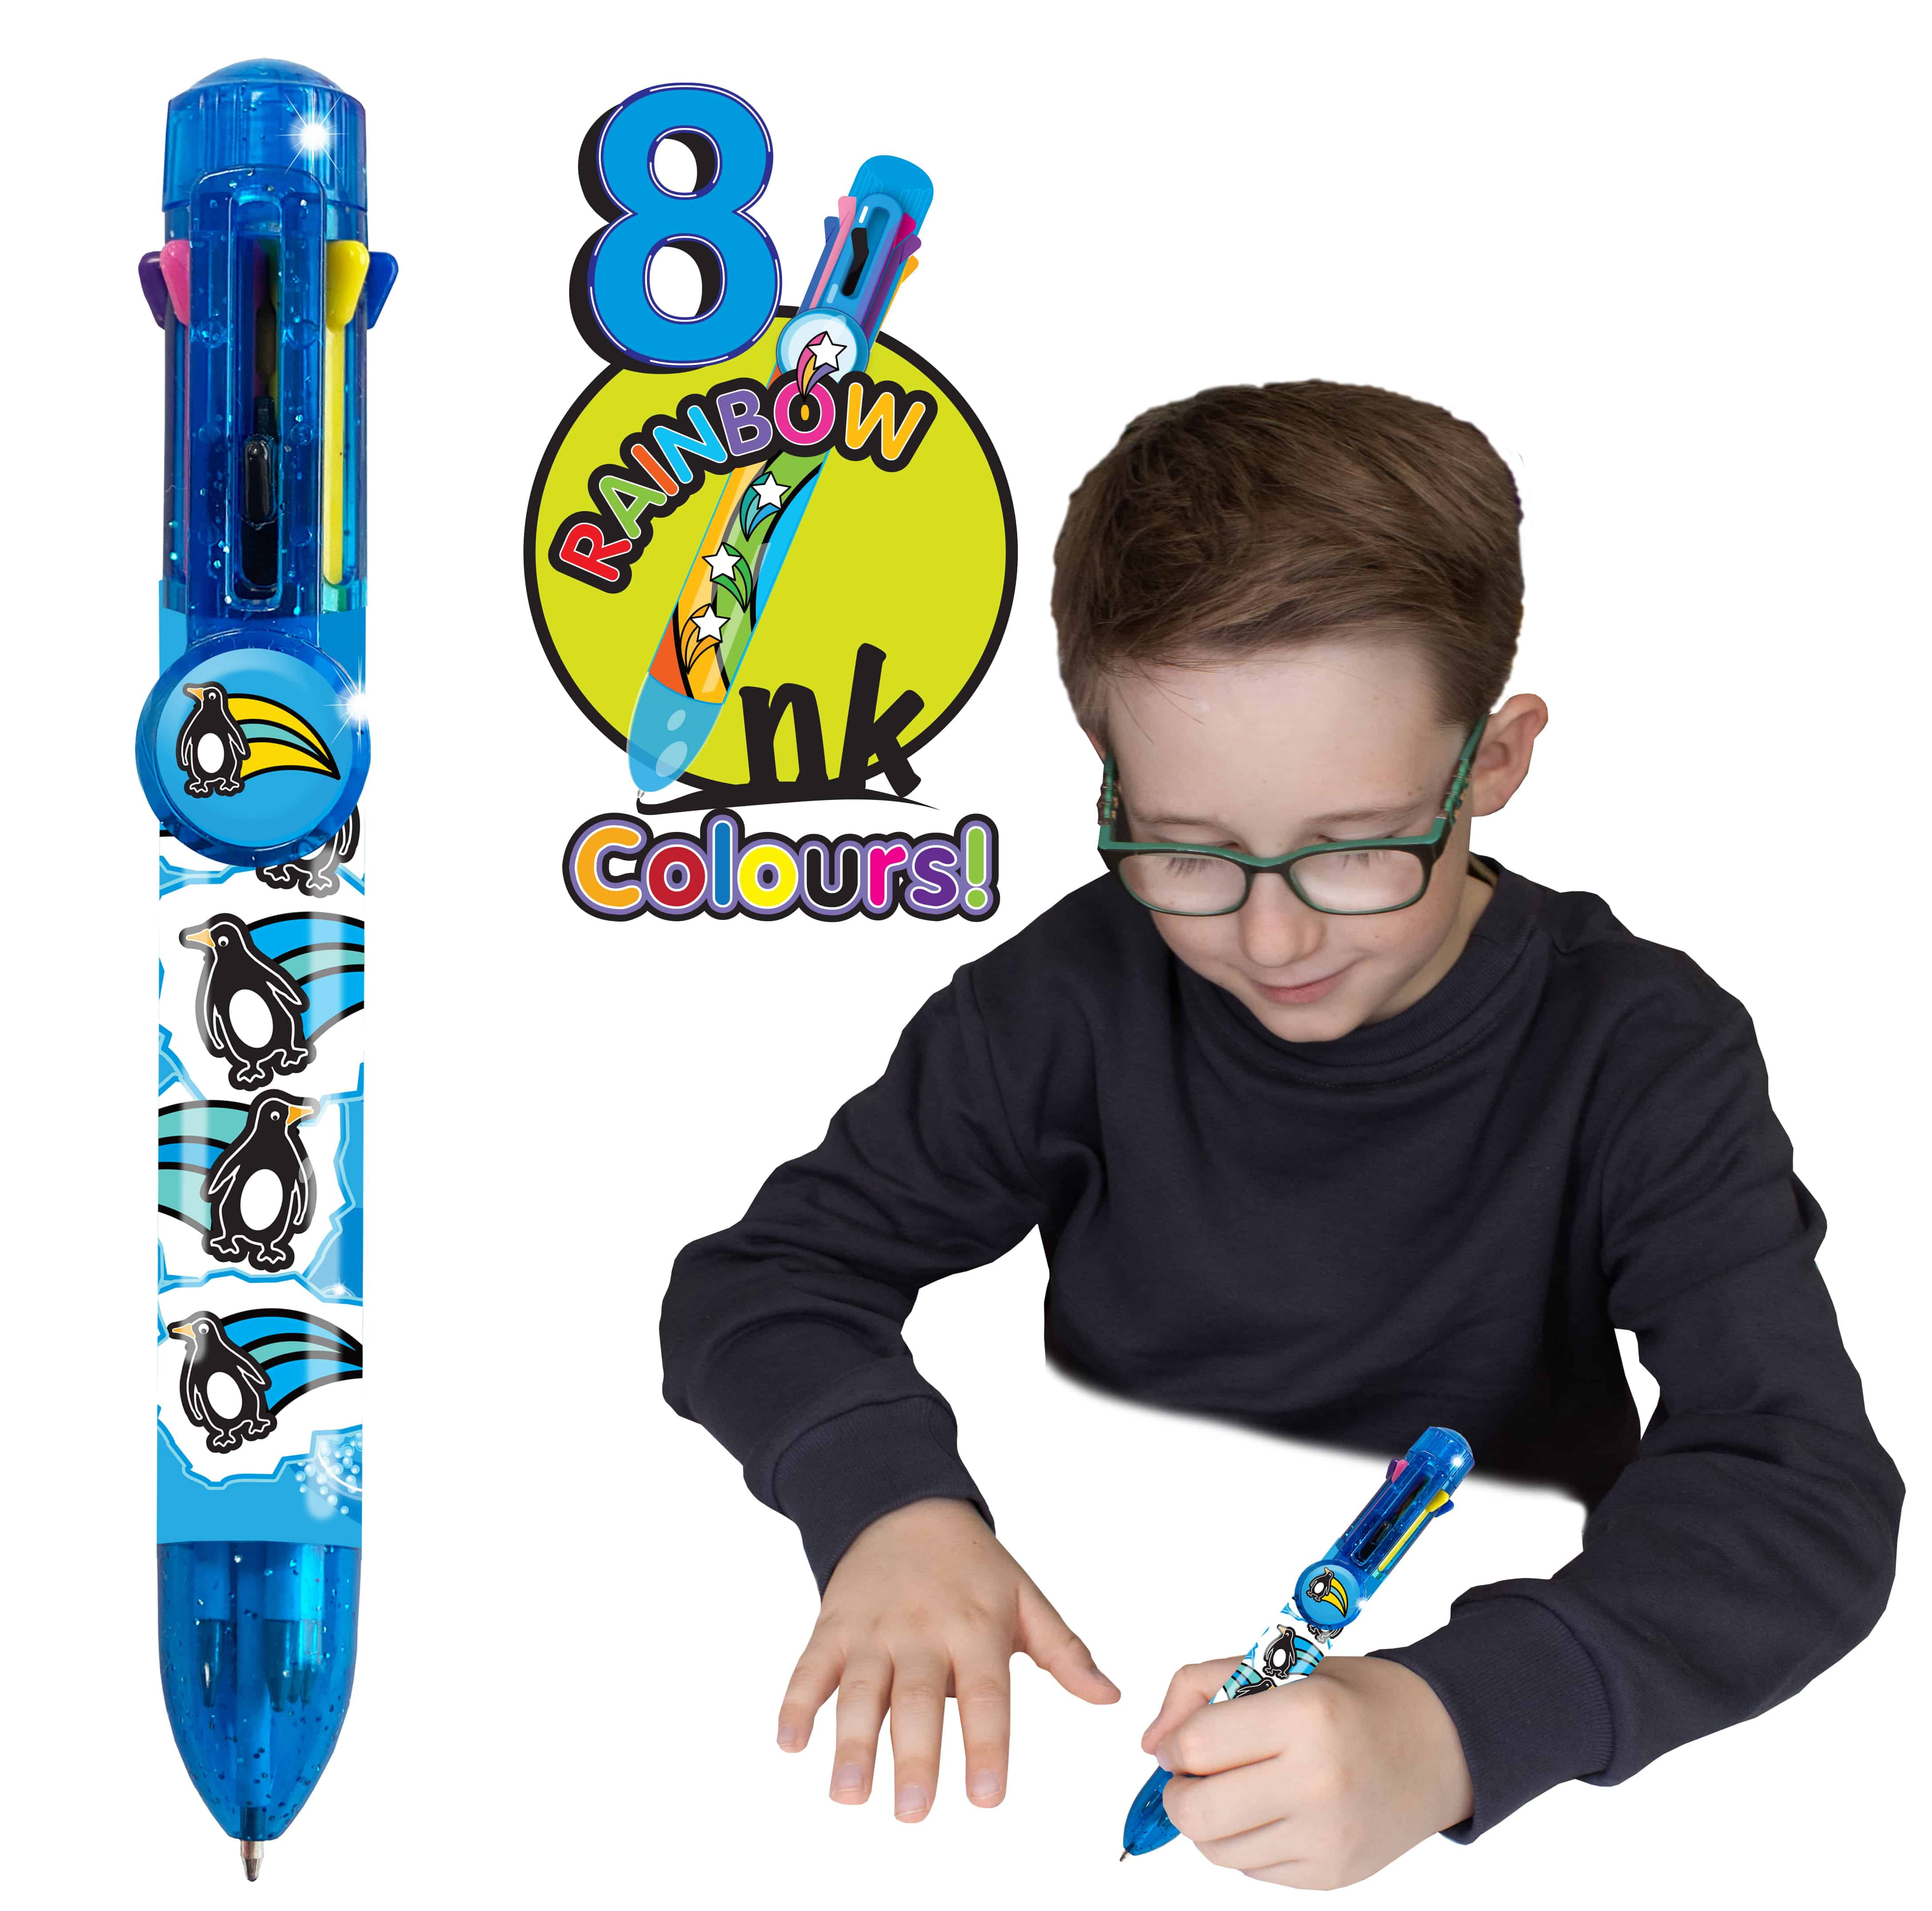 Rainbow Writer - Penguin Multicolor Pen from Deluxebase. 8 in 1 Retractable  Ballpoint Pen. Colored Pens for Kids Back to School Supplies and Office